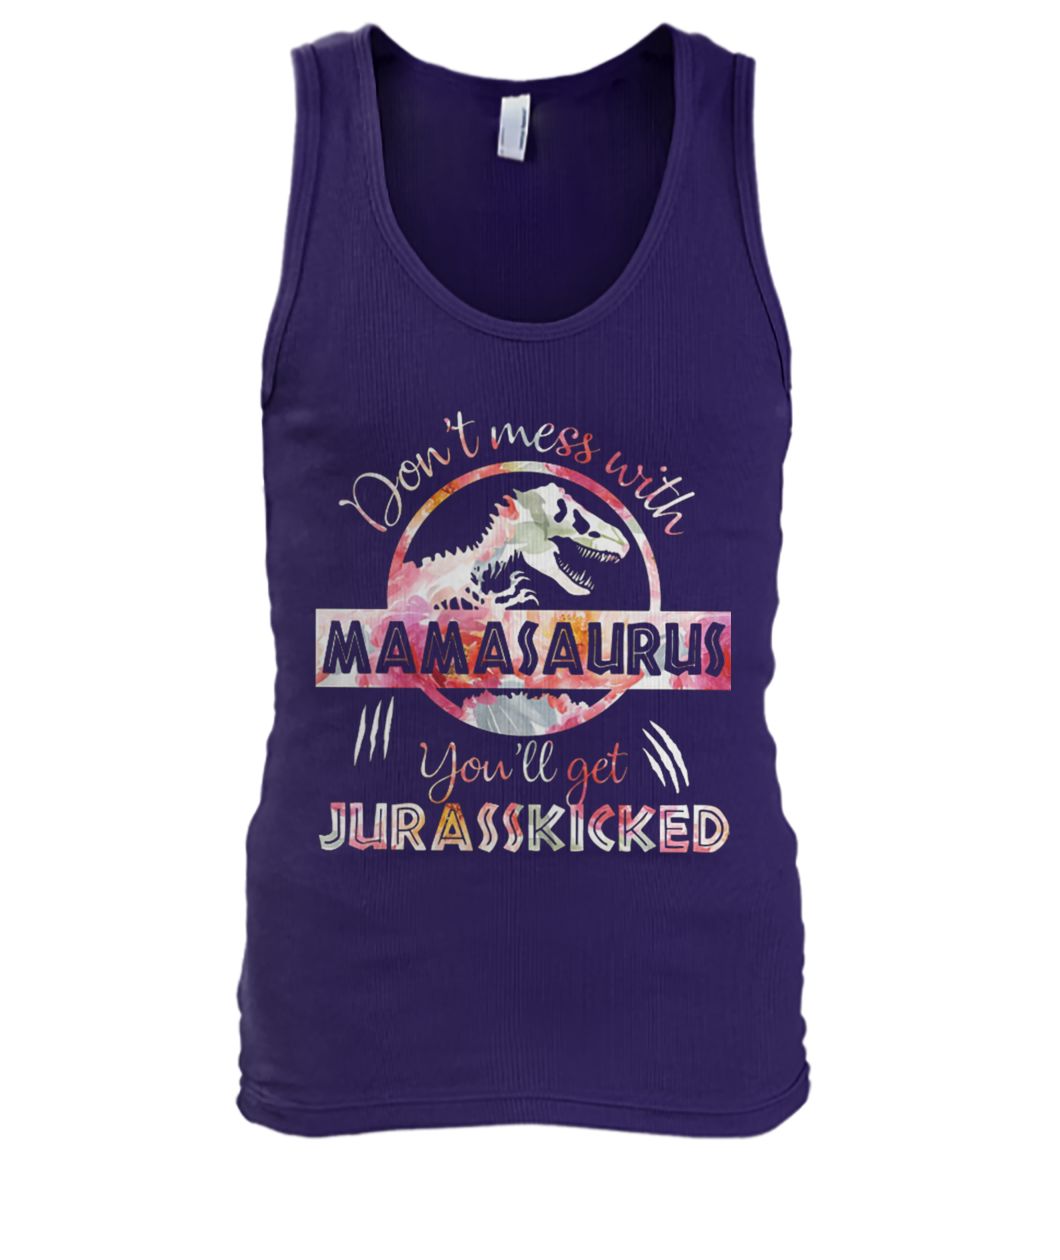 Don't mess with mamasaurus you'll get jurasskicked floral men's tank top